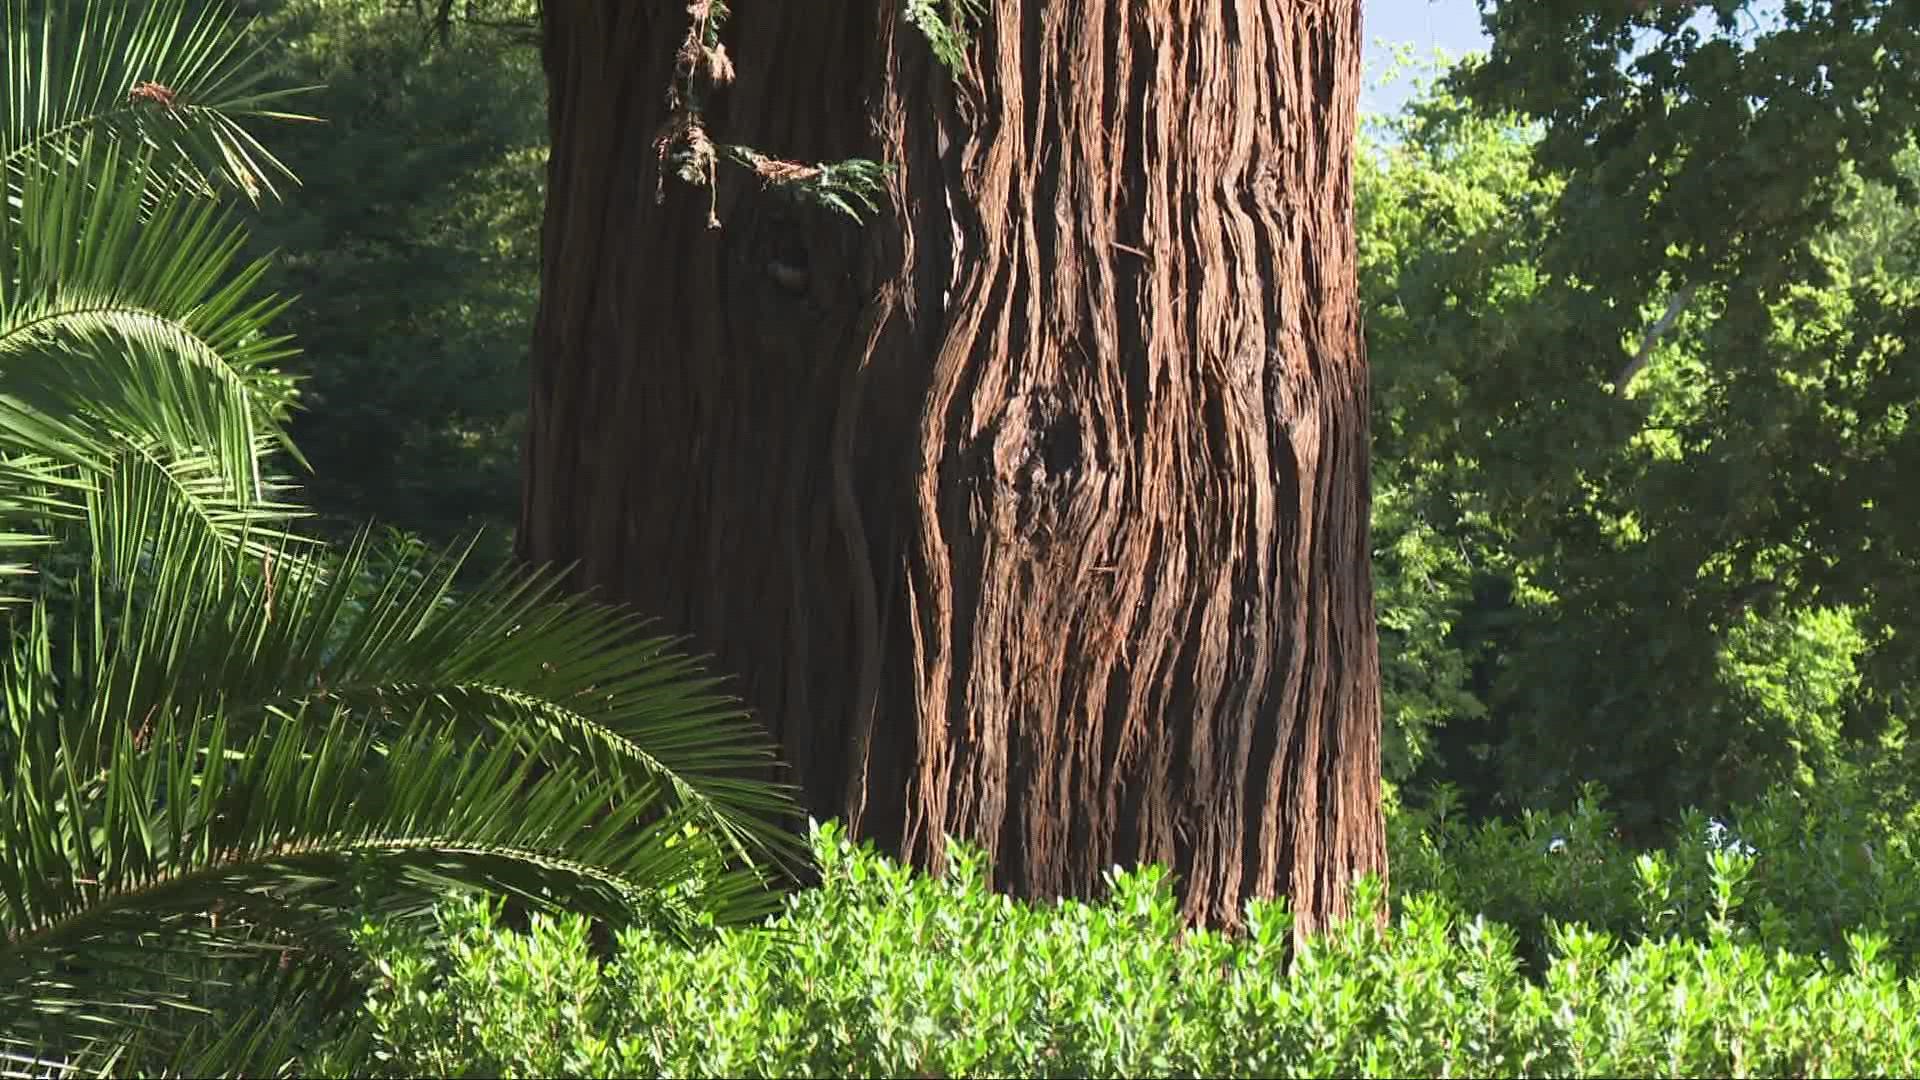 Since 2010, nearly 150 million trees have died in California's natural forests because of conditions caused by lack of rain, extreme heat and overcrowding.